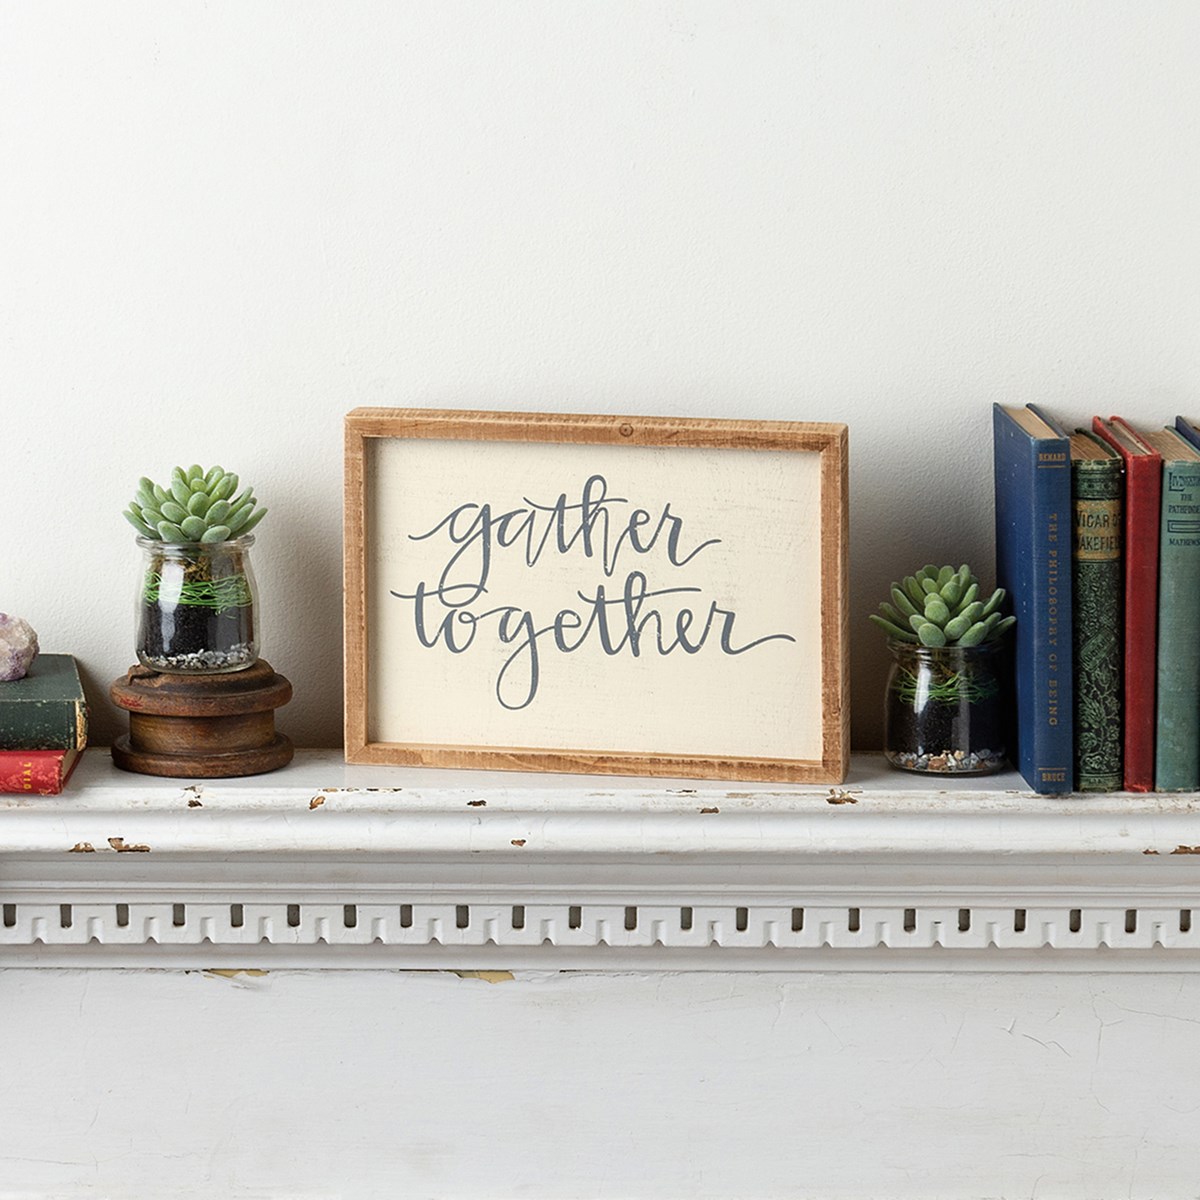 Gather Together Inset Box Sign - Wood